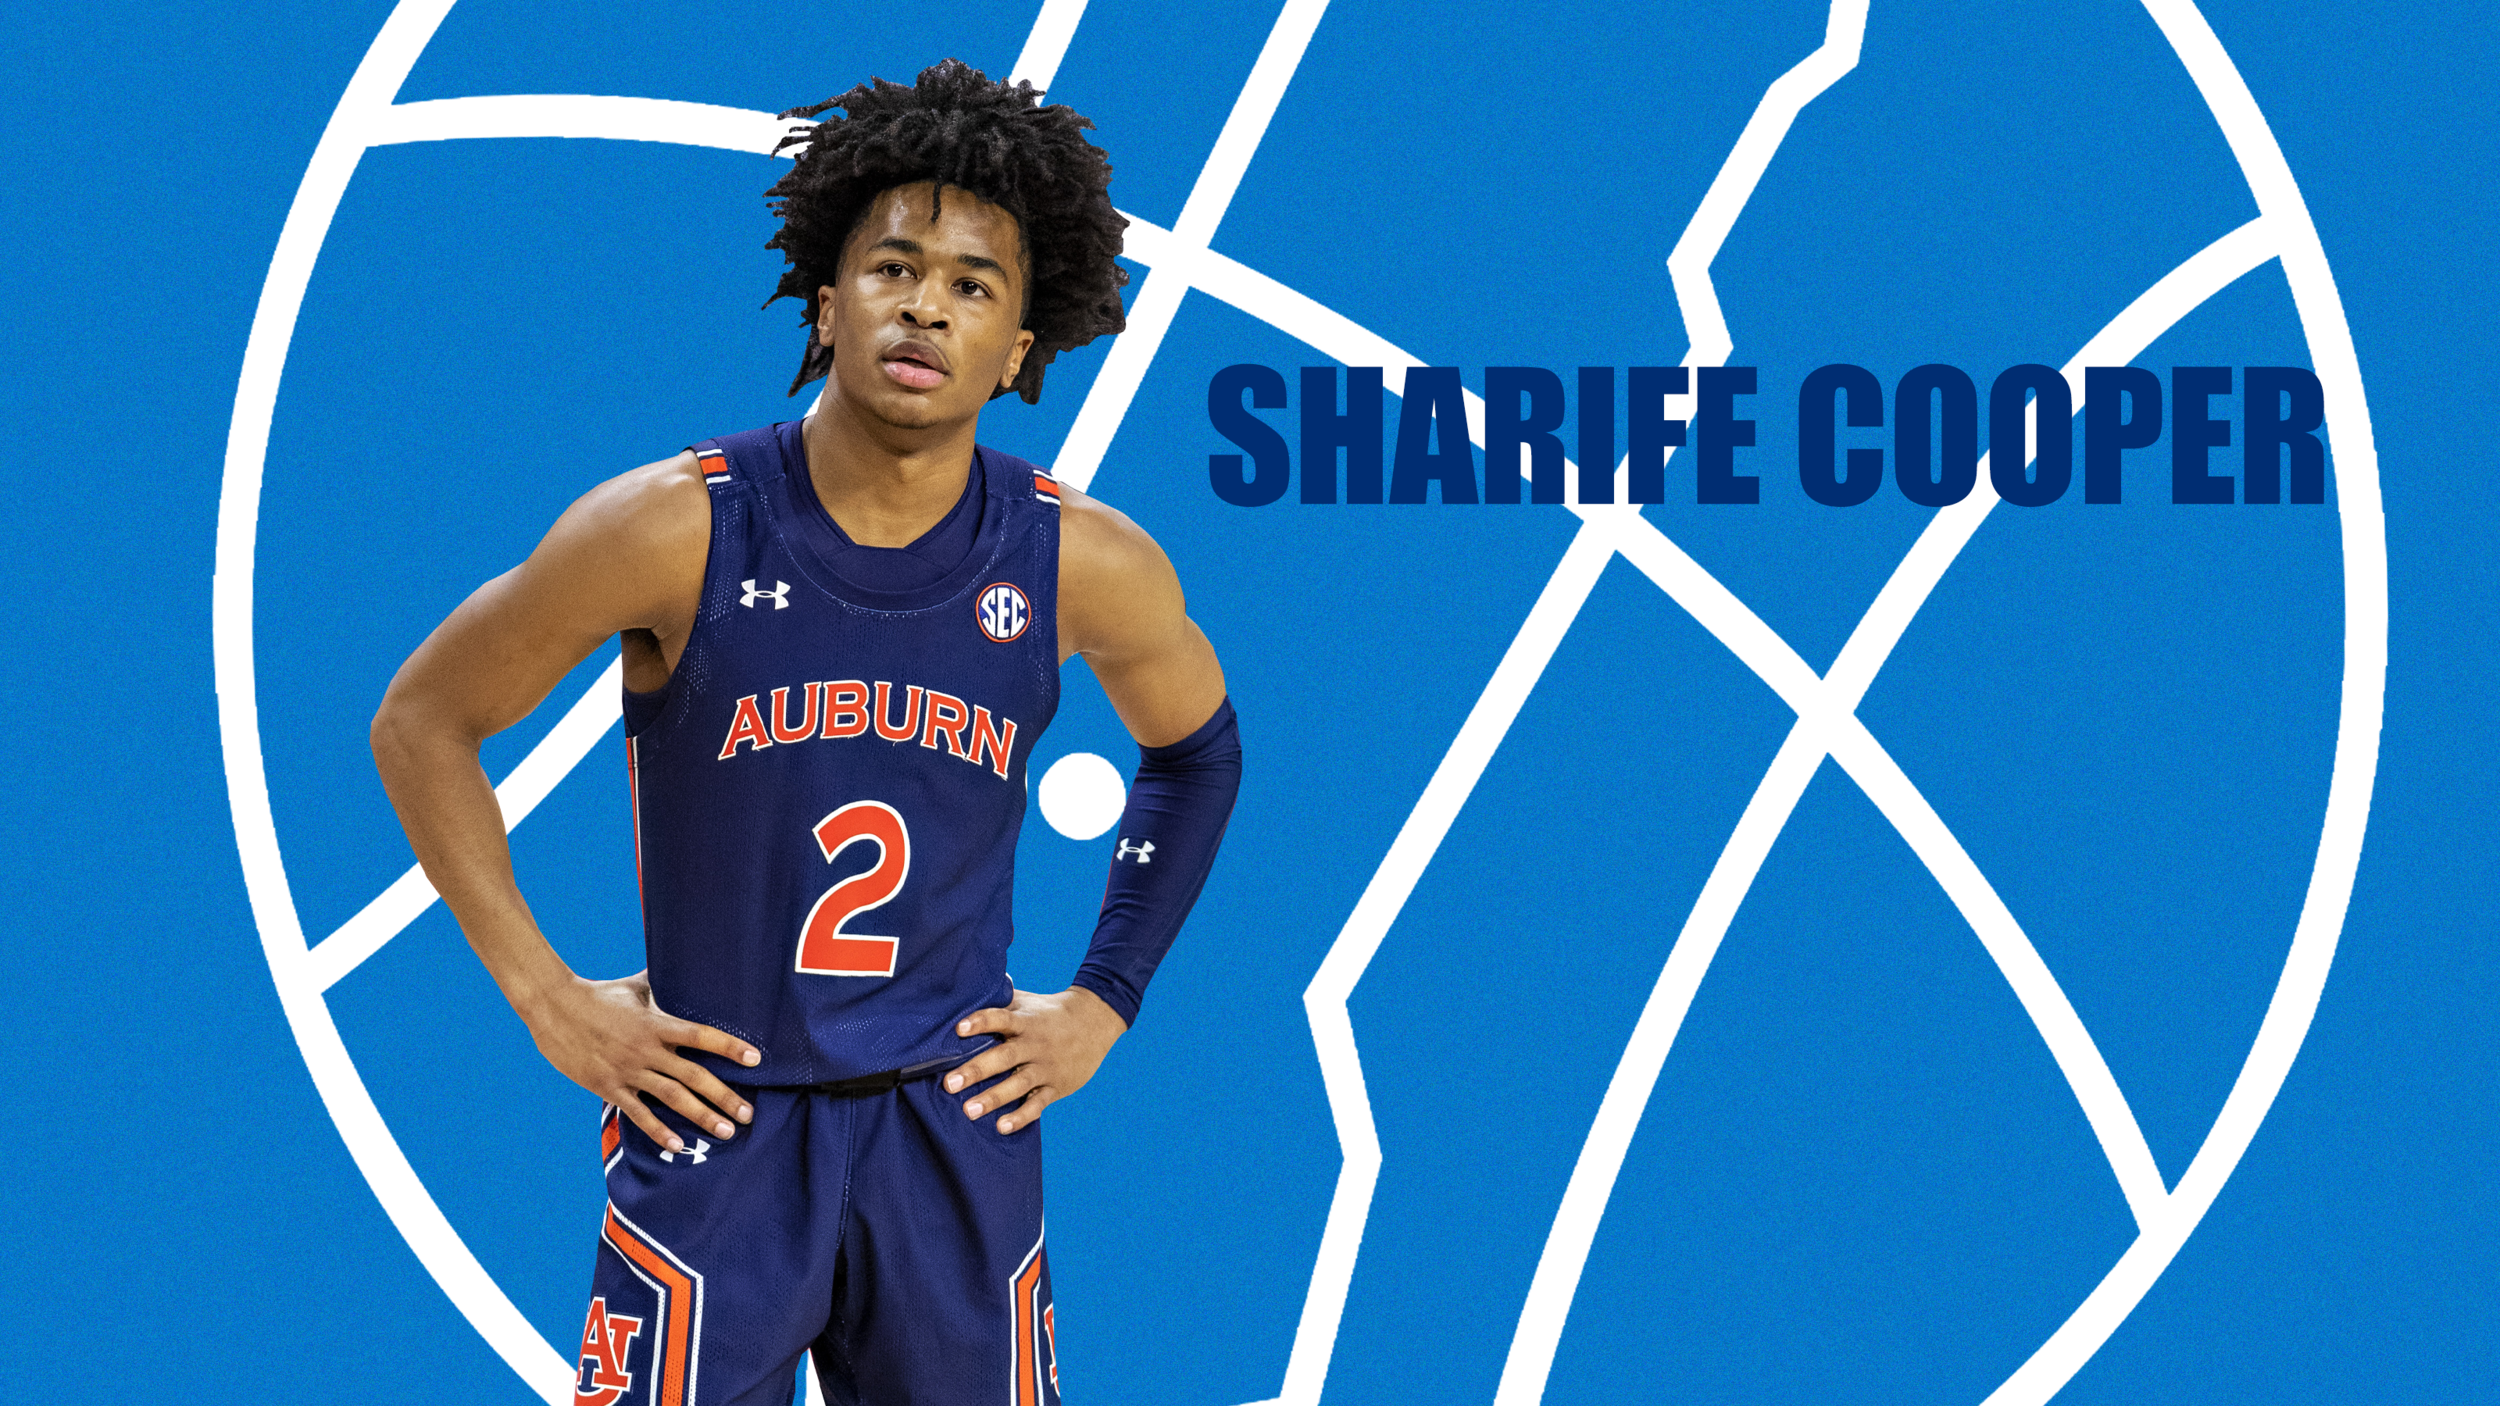 NBA G League - Sharife Cooper for The 2023 Collection: Chapter 02